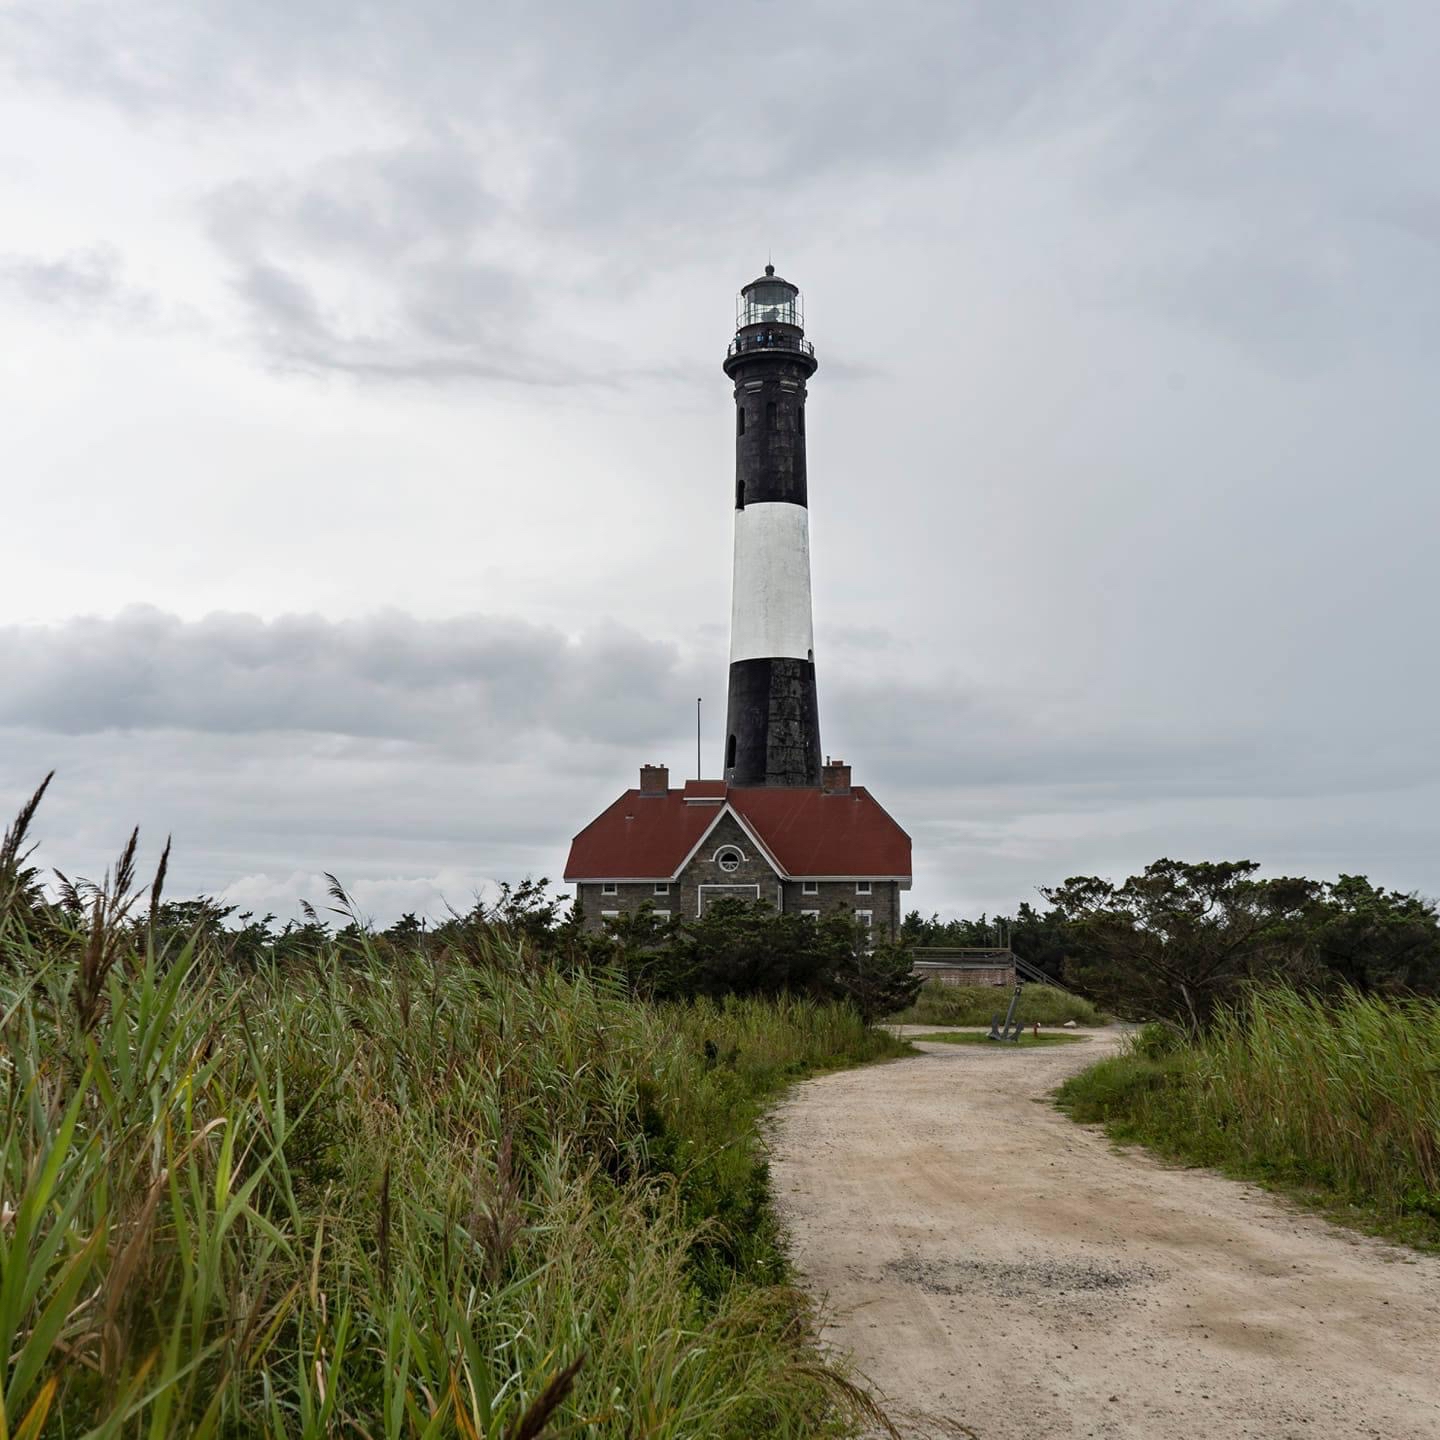 Photo of Fire Island Lighthouse centered in image with gravel road on right side